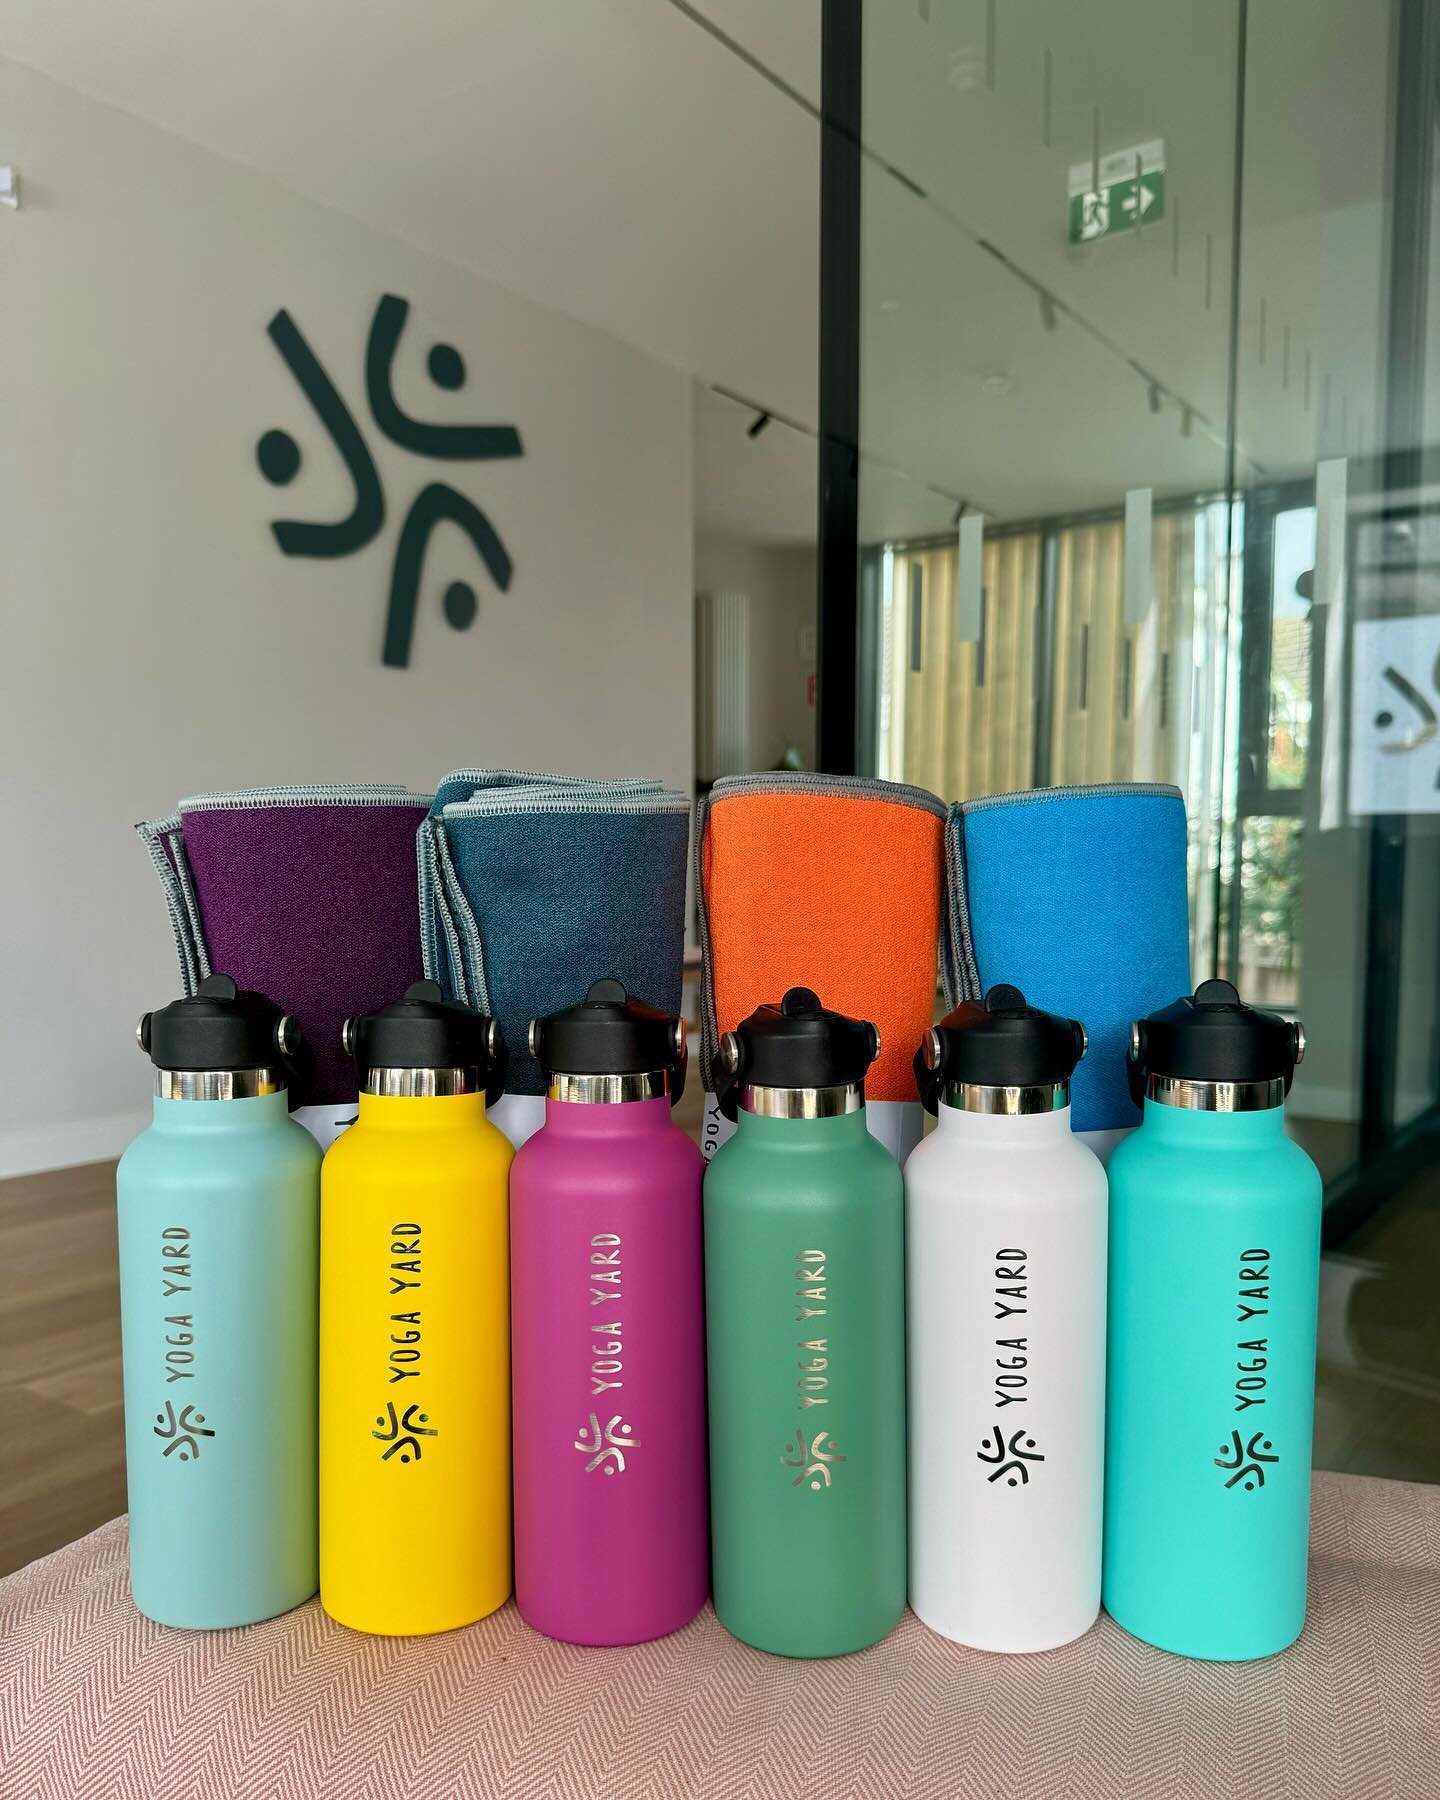 ✨ Competition Time ✨
To celebrate our 1st birthday, we&rsquo;re giving you the chance to WIN a Yoga Yard water bottle, yoga towel and a 5 class pack worth &euro;100!! 

To win this amazing prize, make sure you&rsquo;re following us and share some 🩷 